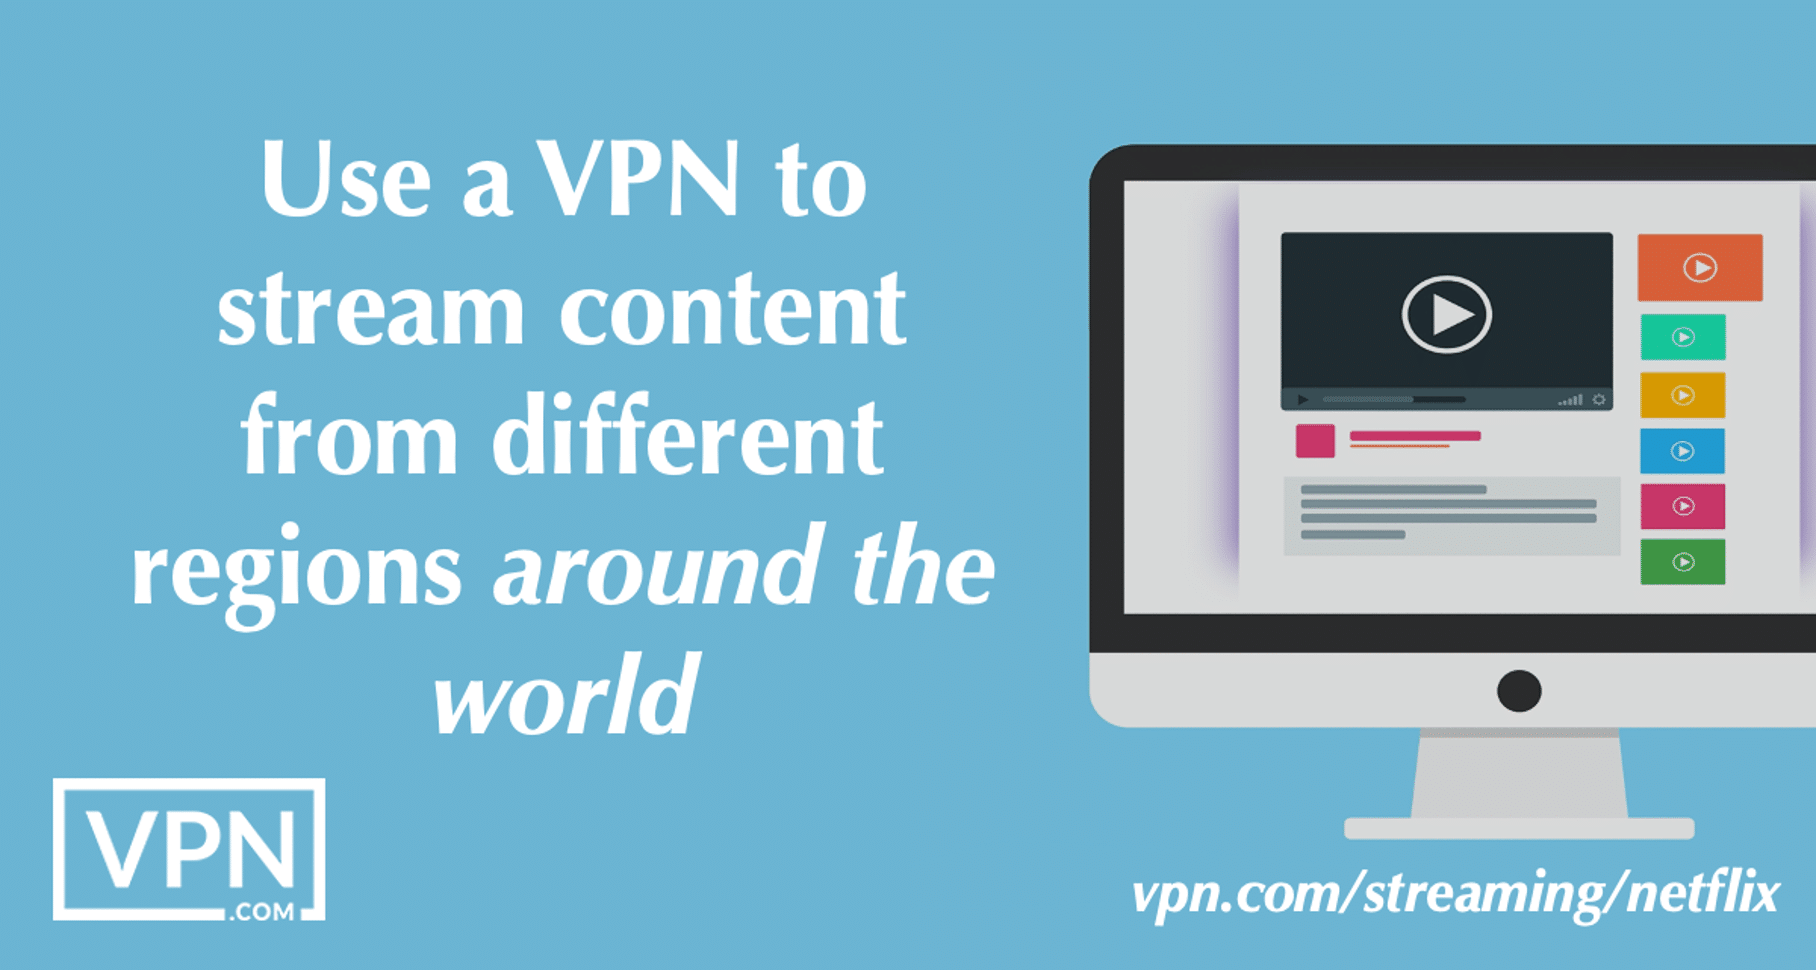 Use a VPN to stream content from different regions around the world.